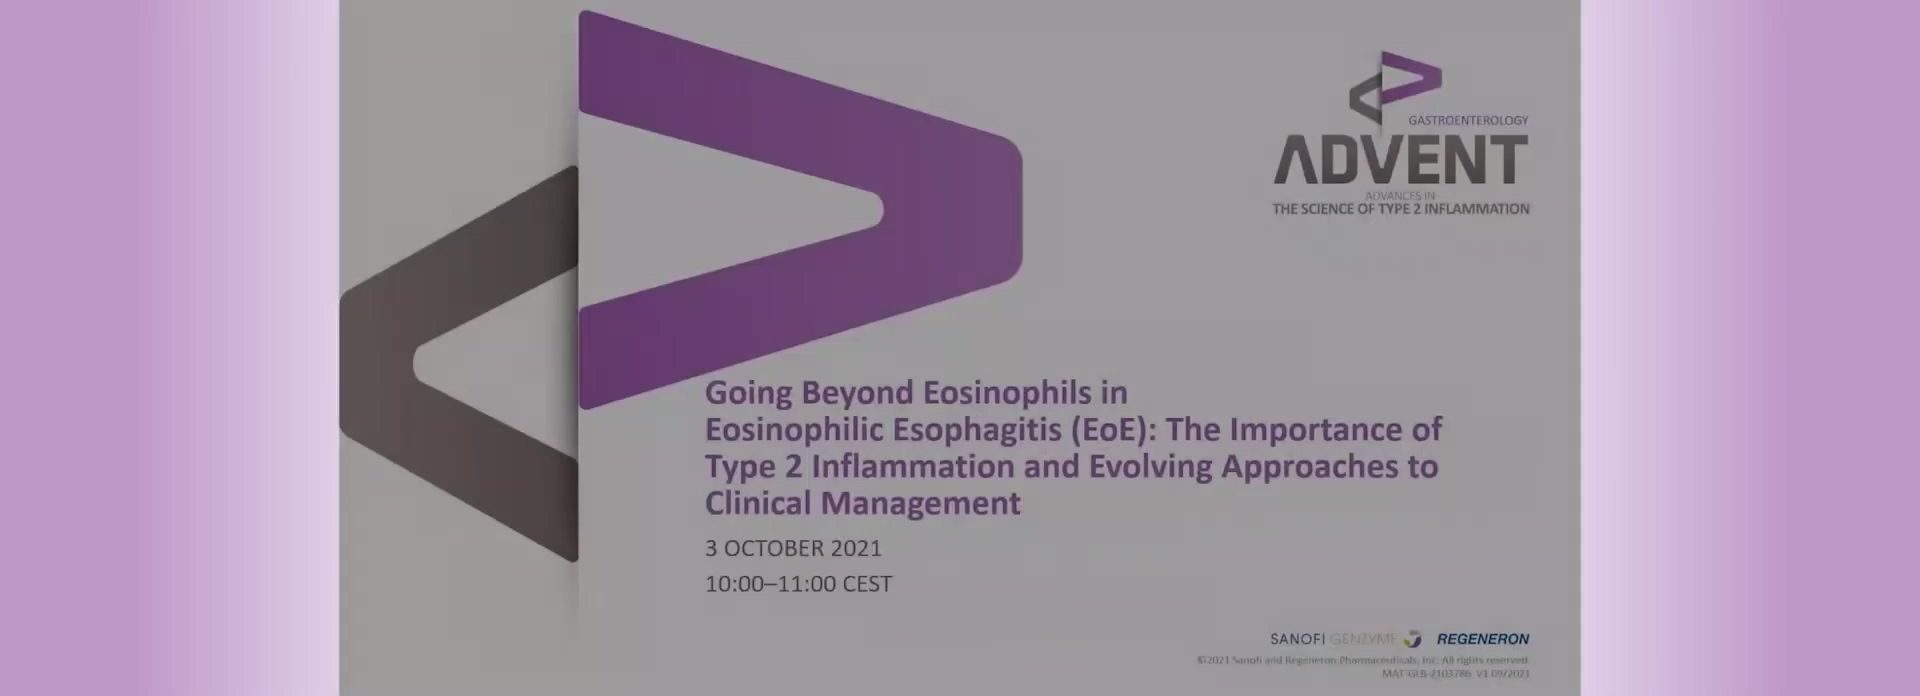 Going Beyond Eosinophils in Eosinophilic Esophagitis (EoE): The Importance of Type 2 Inflammation and Evolving Approaches to Clinical Management (Sanofi Genzyme and Regeneron)